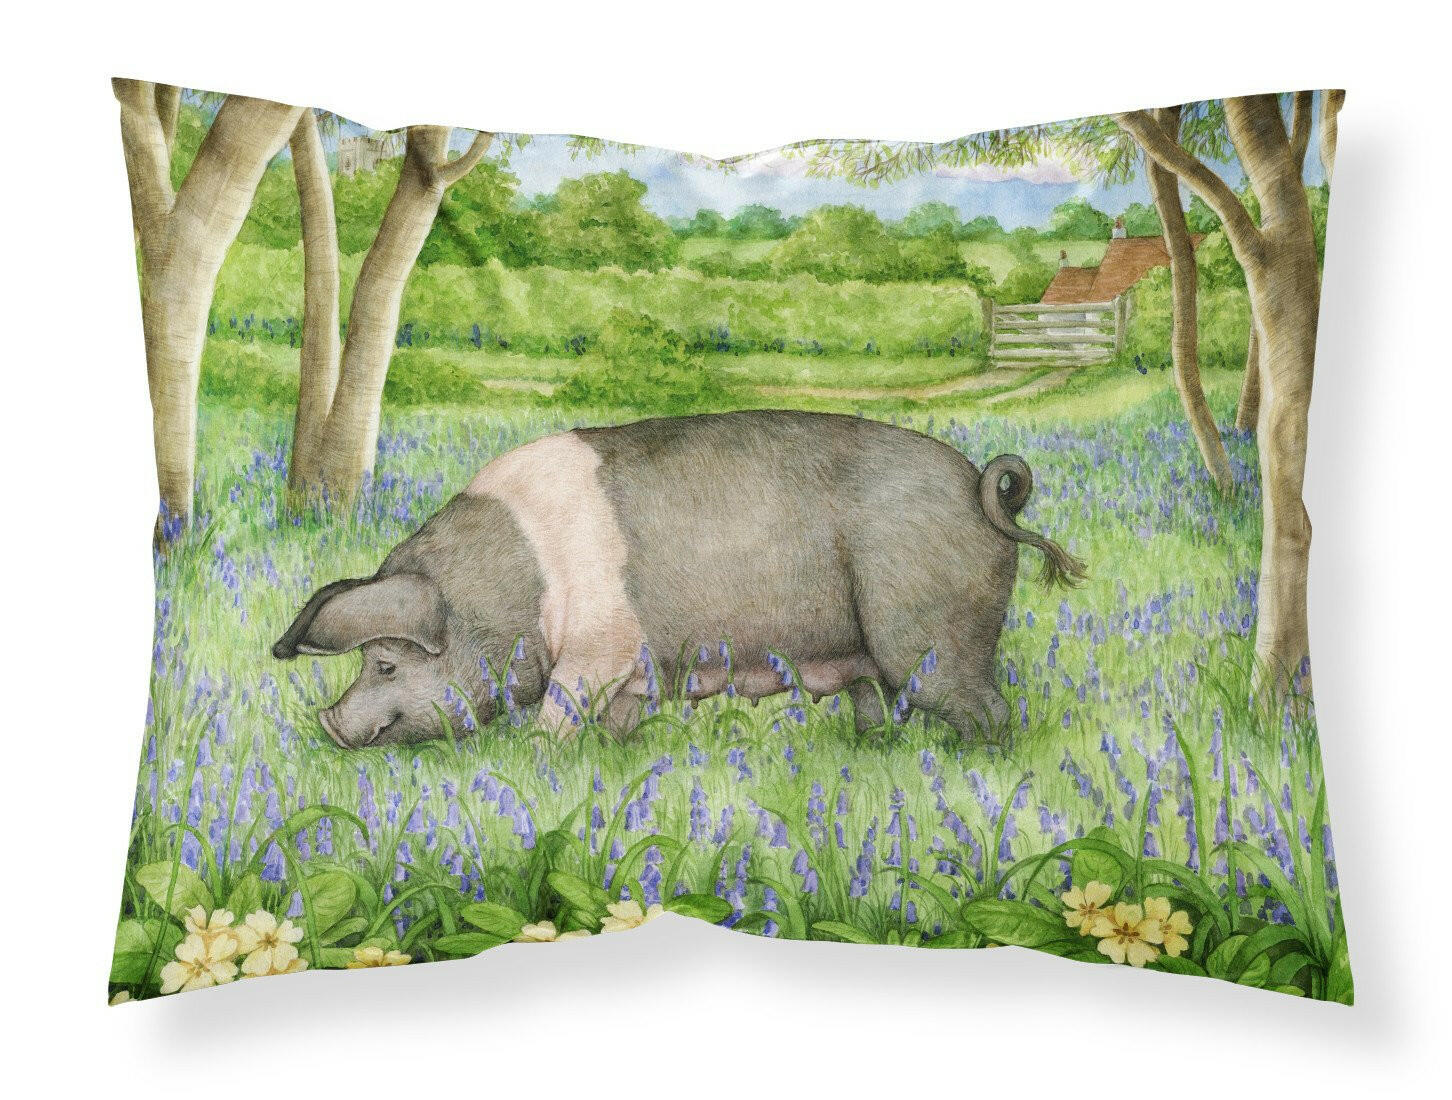 Pig In Bluebells by Debbie Cook Fabric Standard Pillowcase CDCO0377PILLOWCASE by Caroline's Treasures